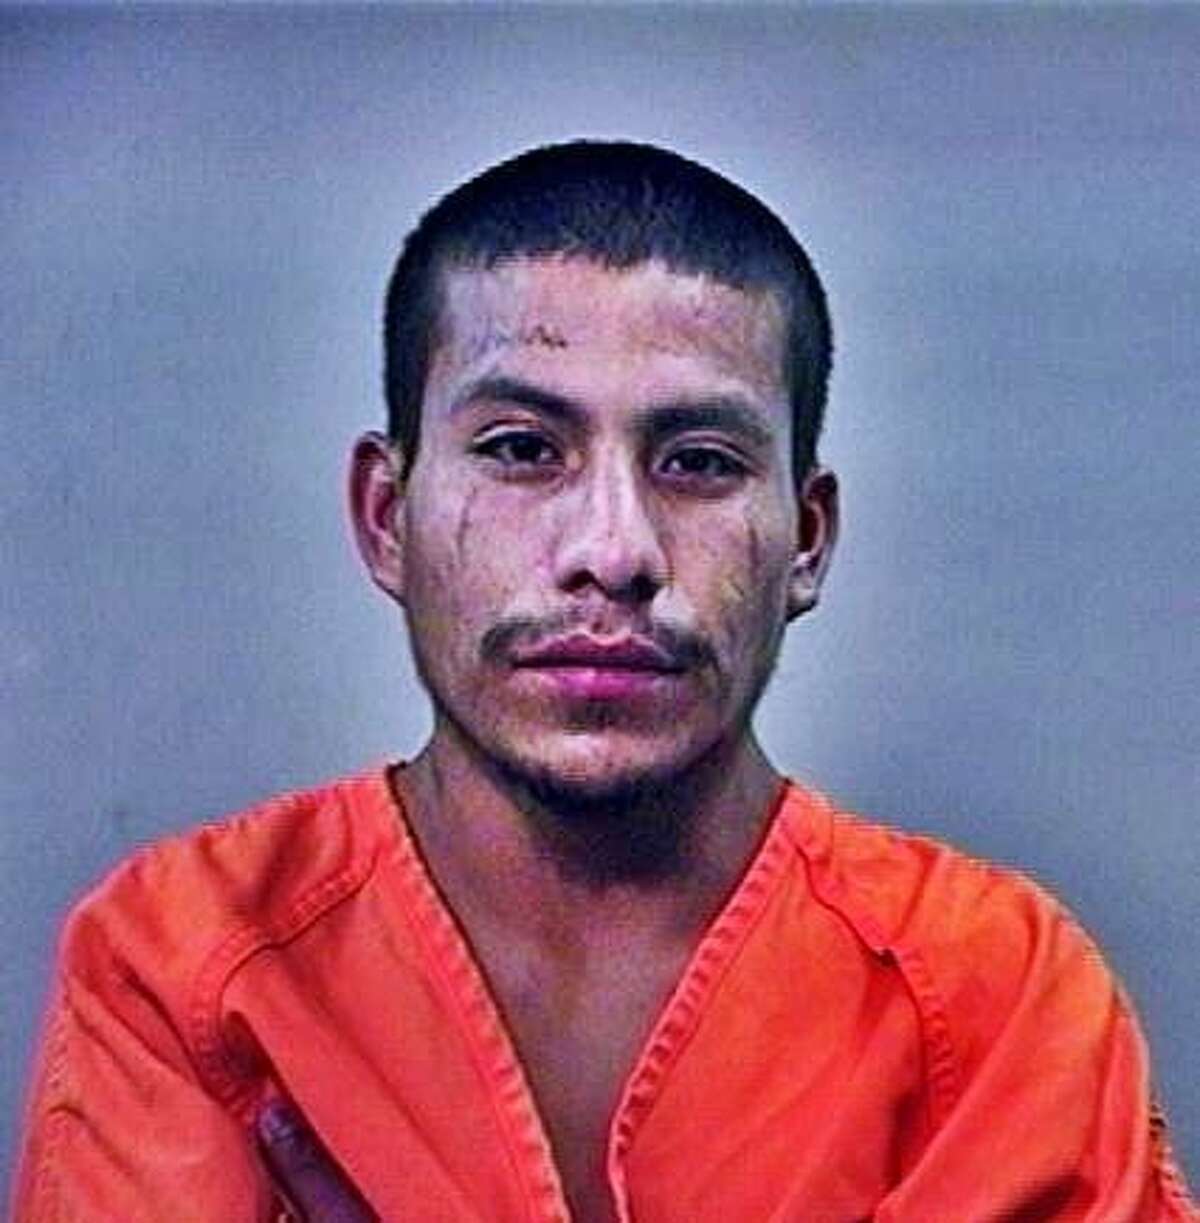 Brazoria County Sheriff's Department officials recently arrested 25-year-old Jesus Atrian in connection with the alleged sexual assault of a 16-year-old Pearland girl with Down Syndrome. Atrian, who is an illegal immigrant from Mexico and a registered sex offender, is currently being held at the Brazoria County Jail on a $500,000 bond.